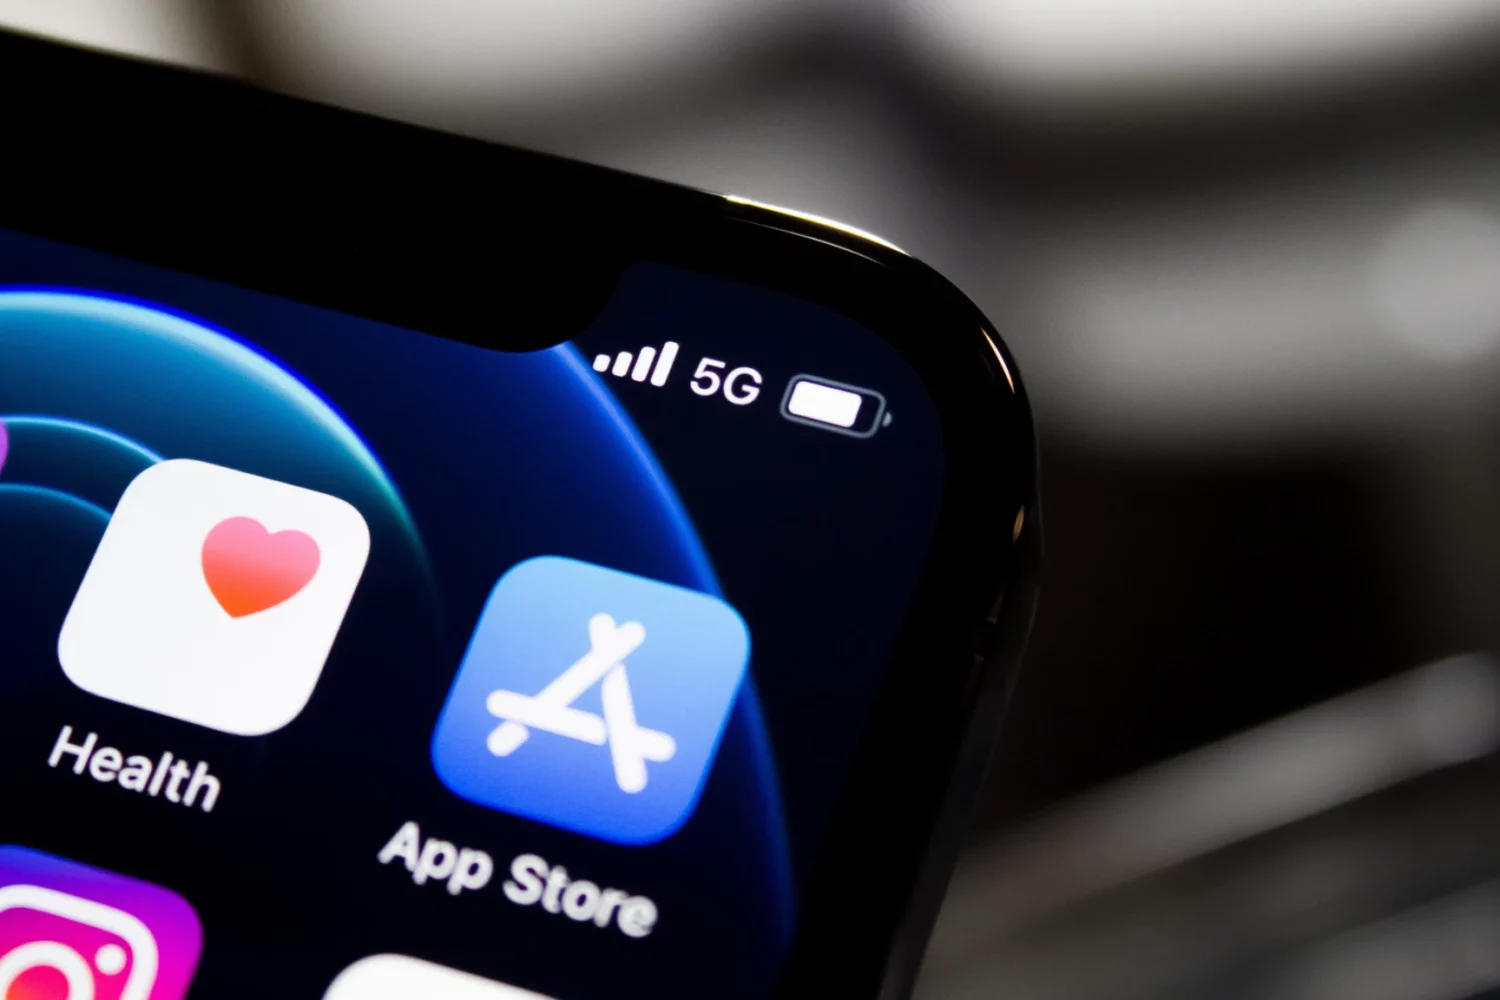 A close-up photograph showing a part of an iPhone display with a focus on the App Store icon in the top right corner